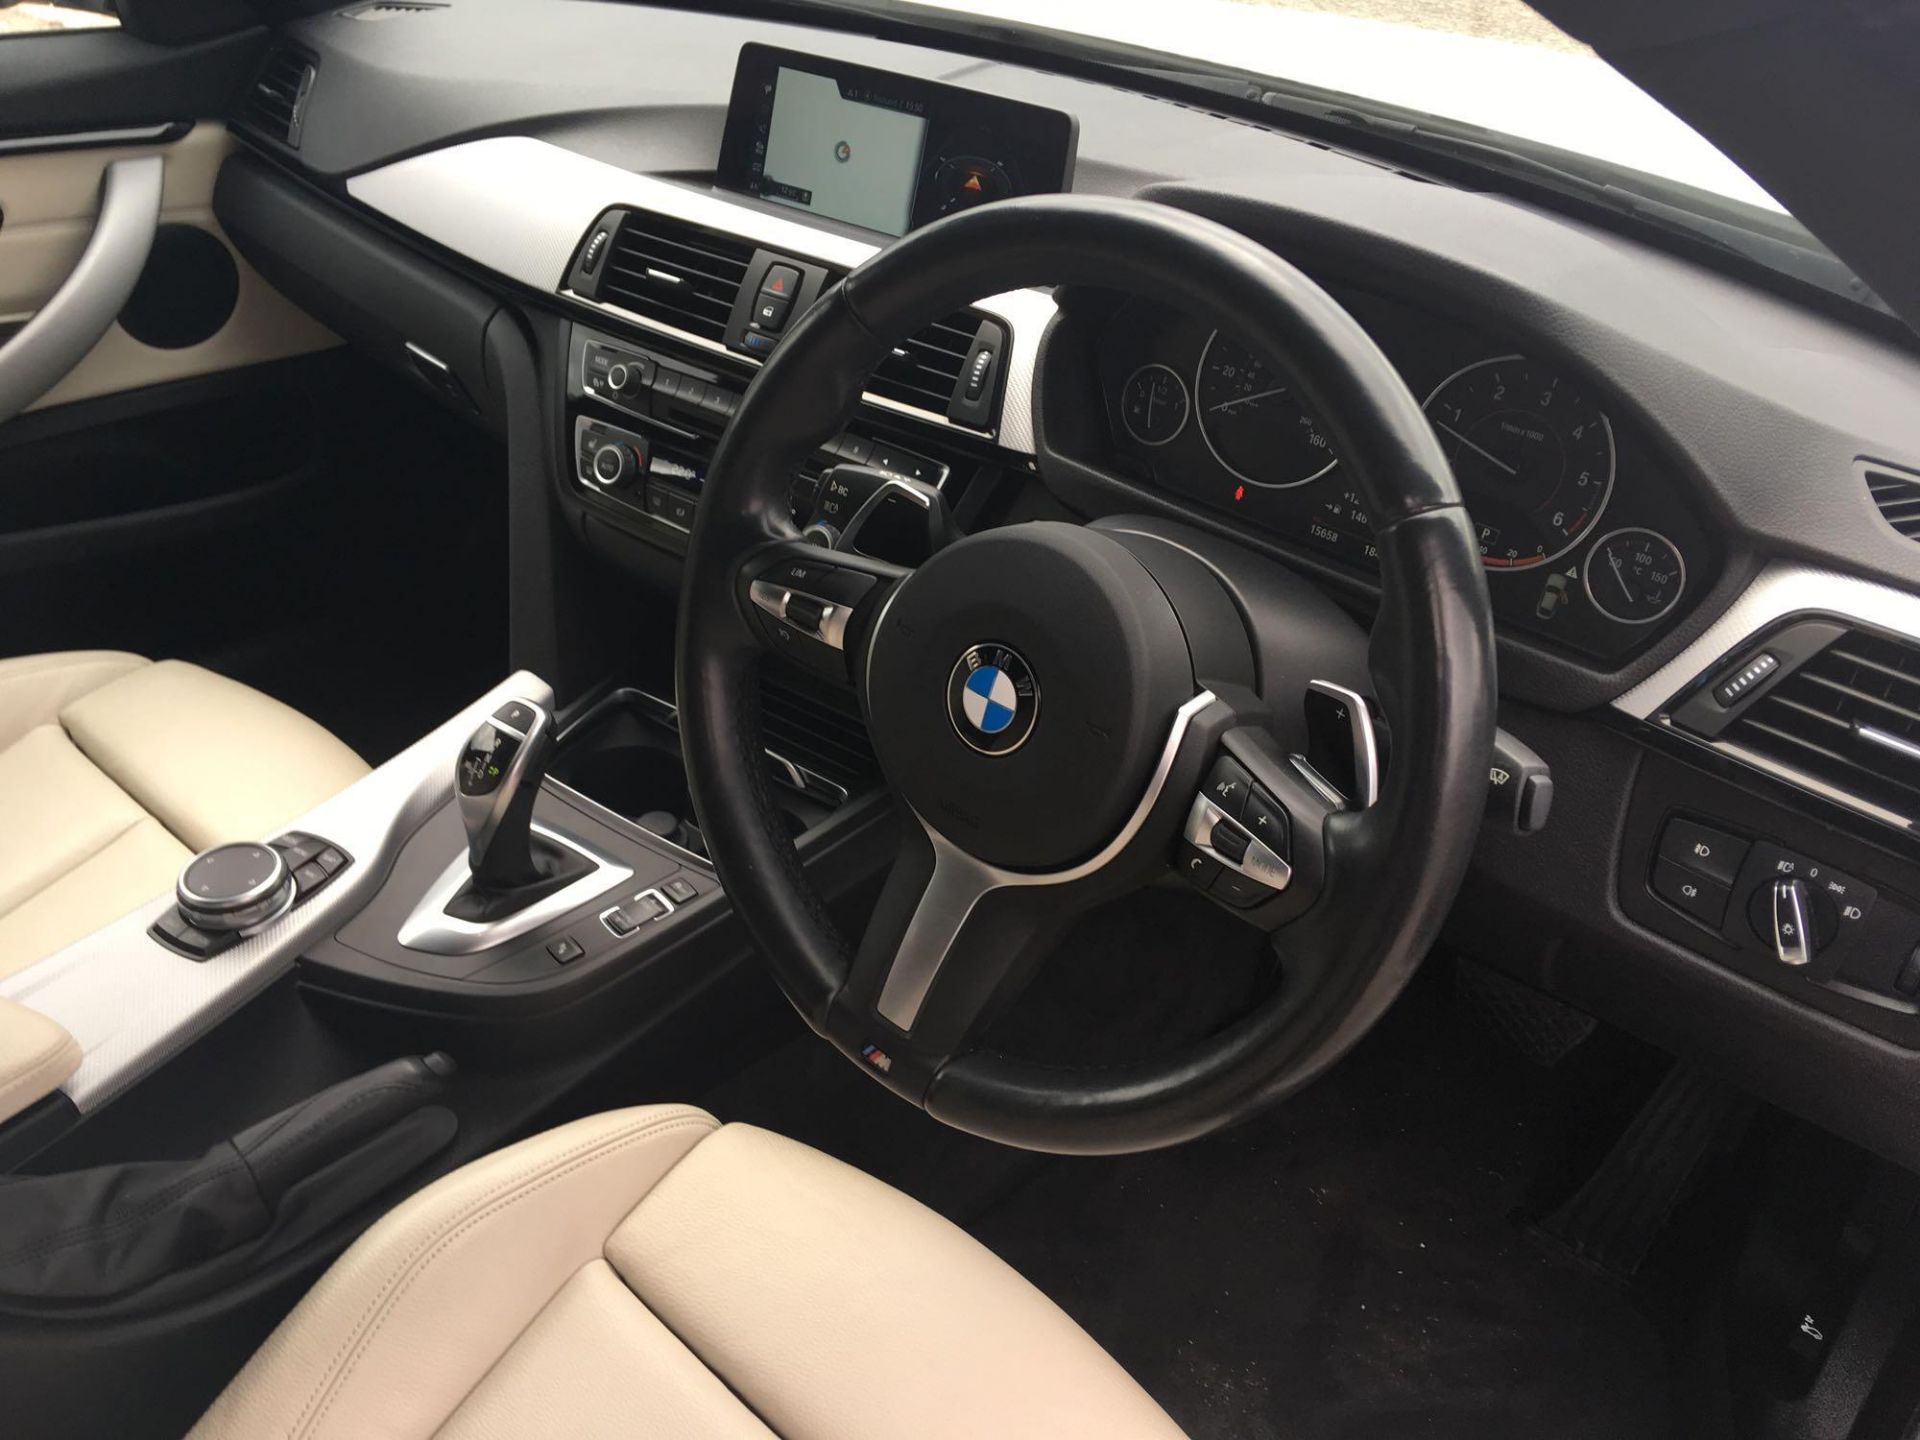 Bmw 430d Xdrive Grancoupe M Sport - 2993cc 5 Door Coupe - Image 5 of 6